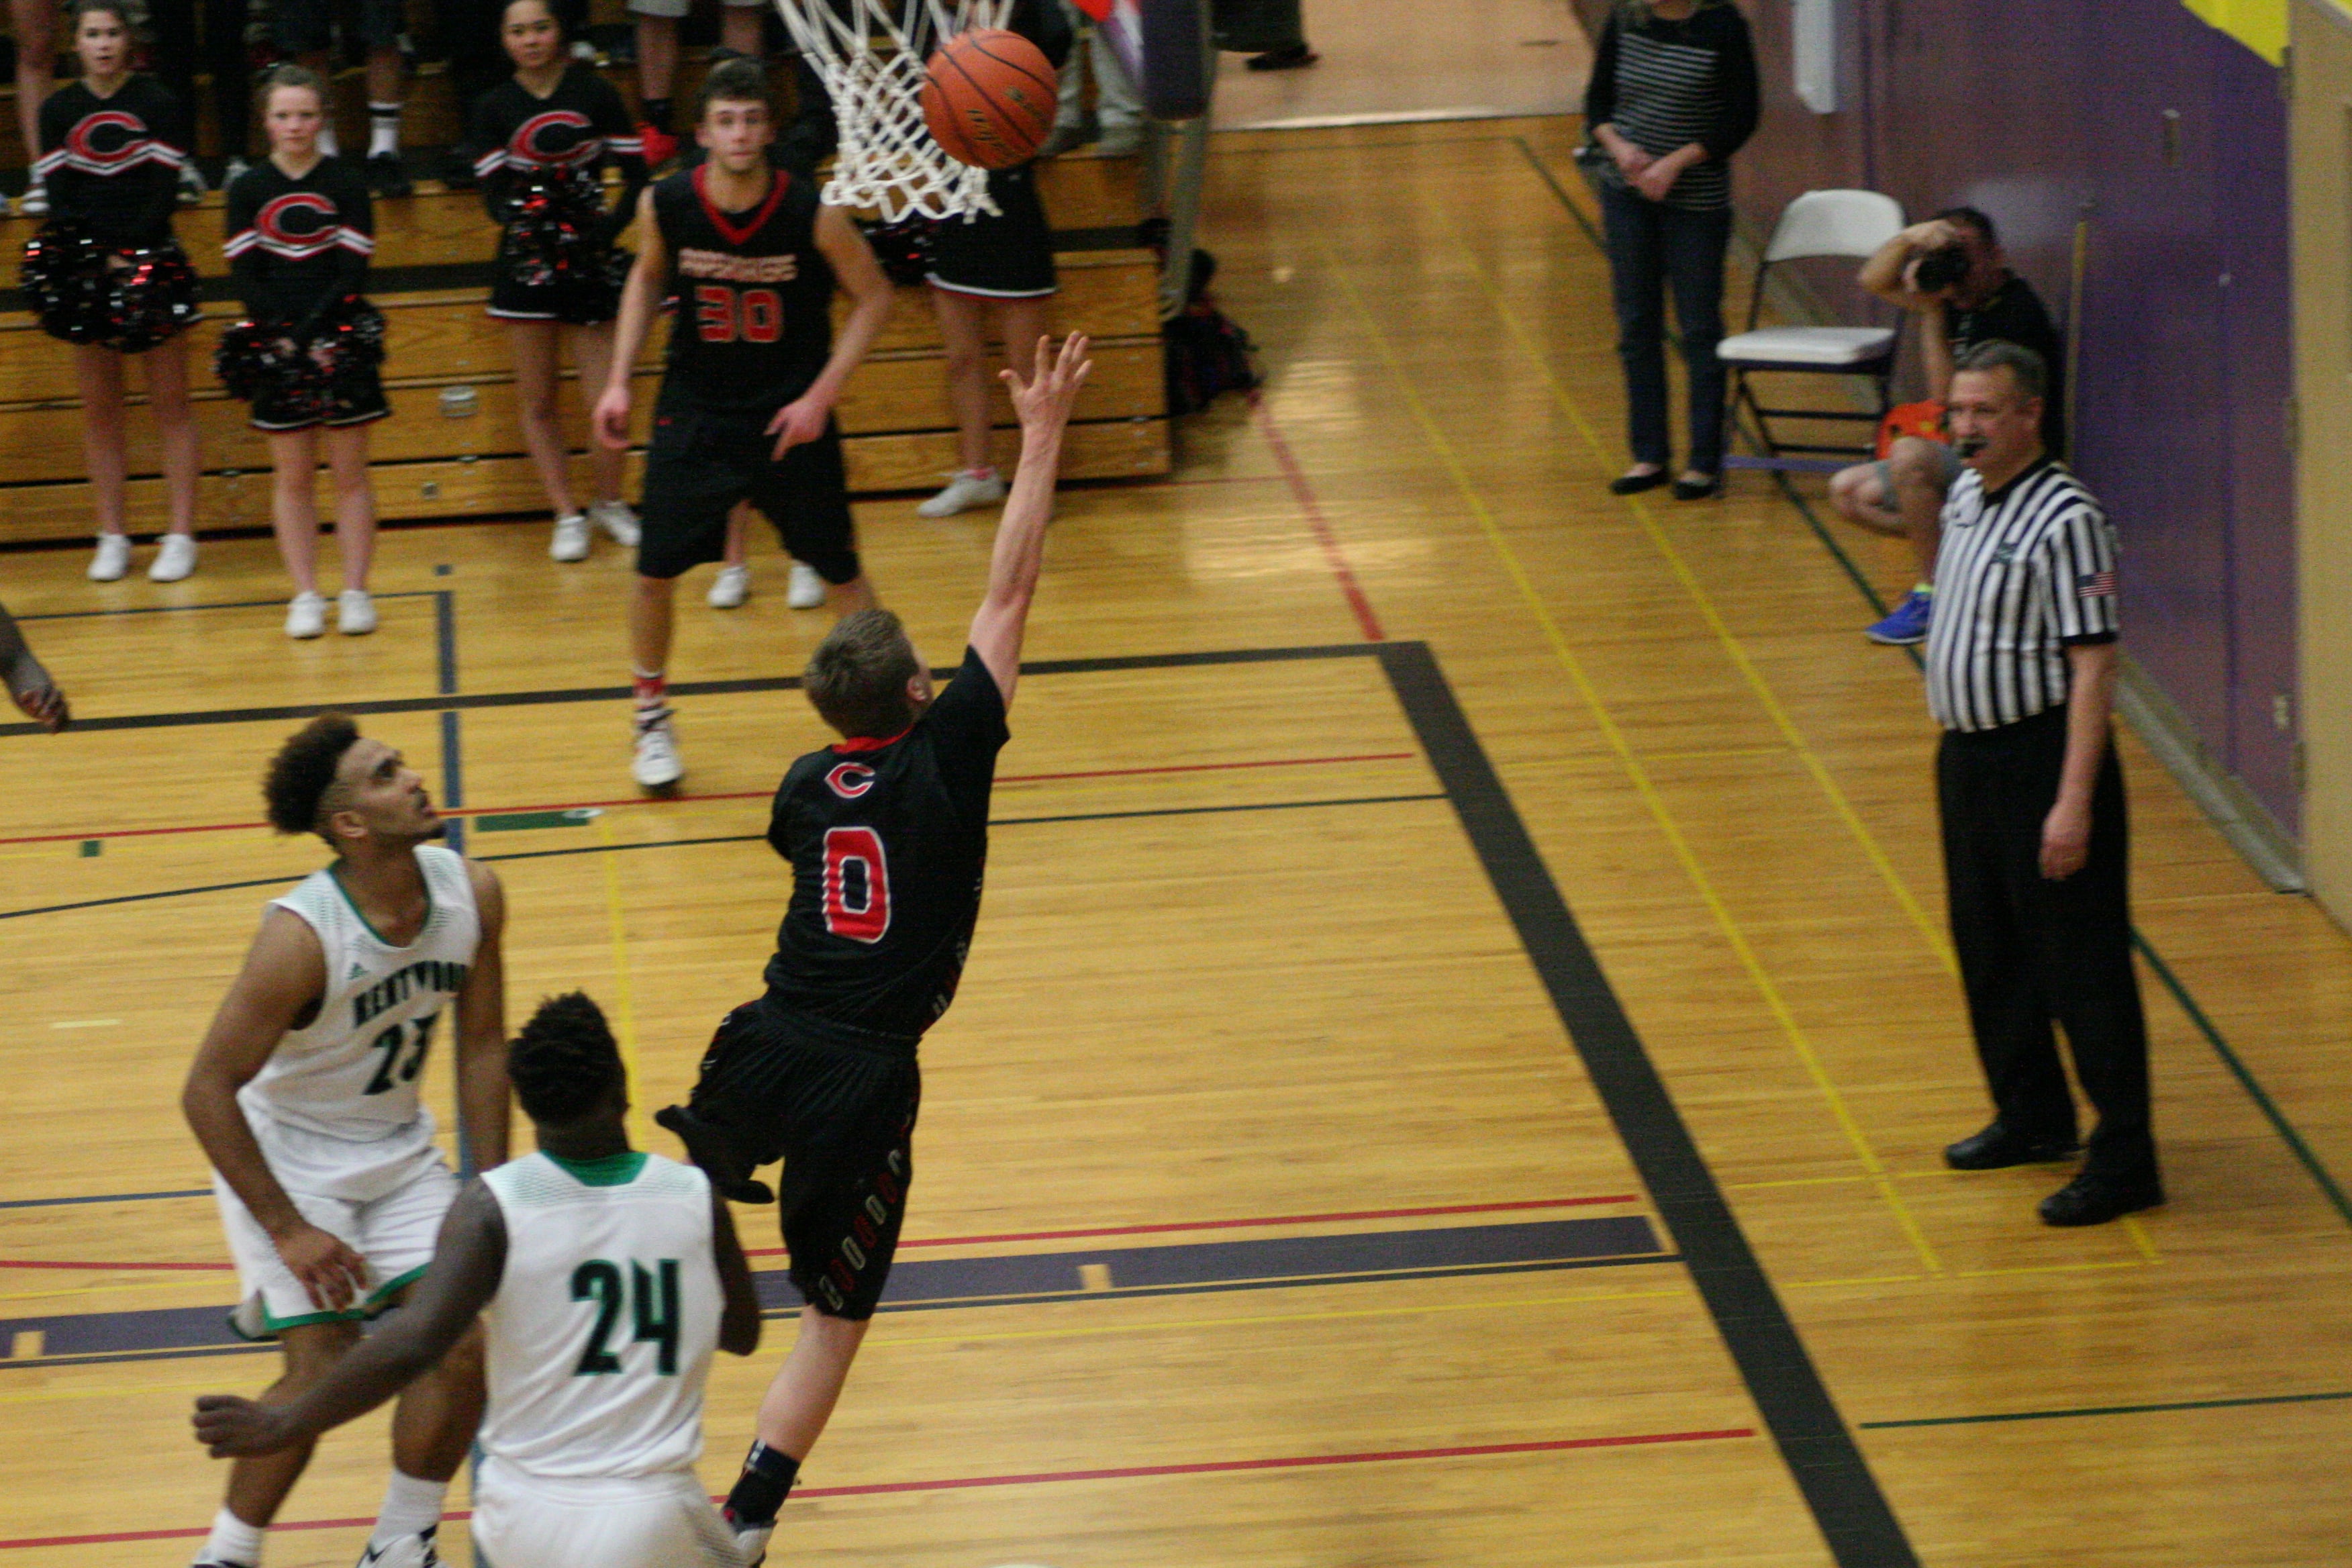 Jake Hansel glides in for two points.